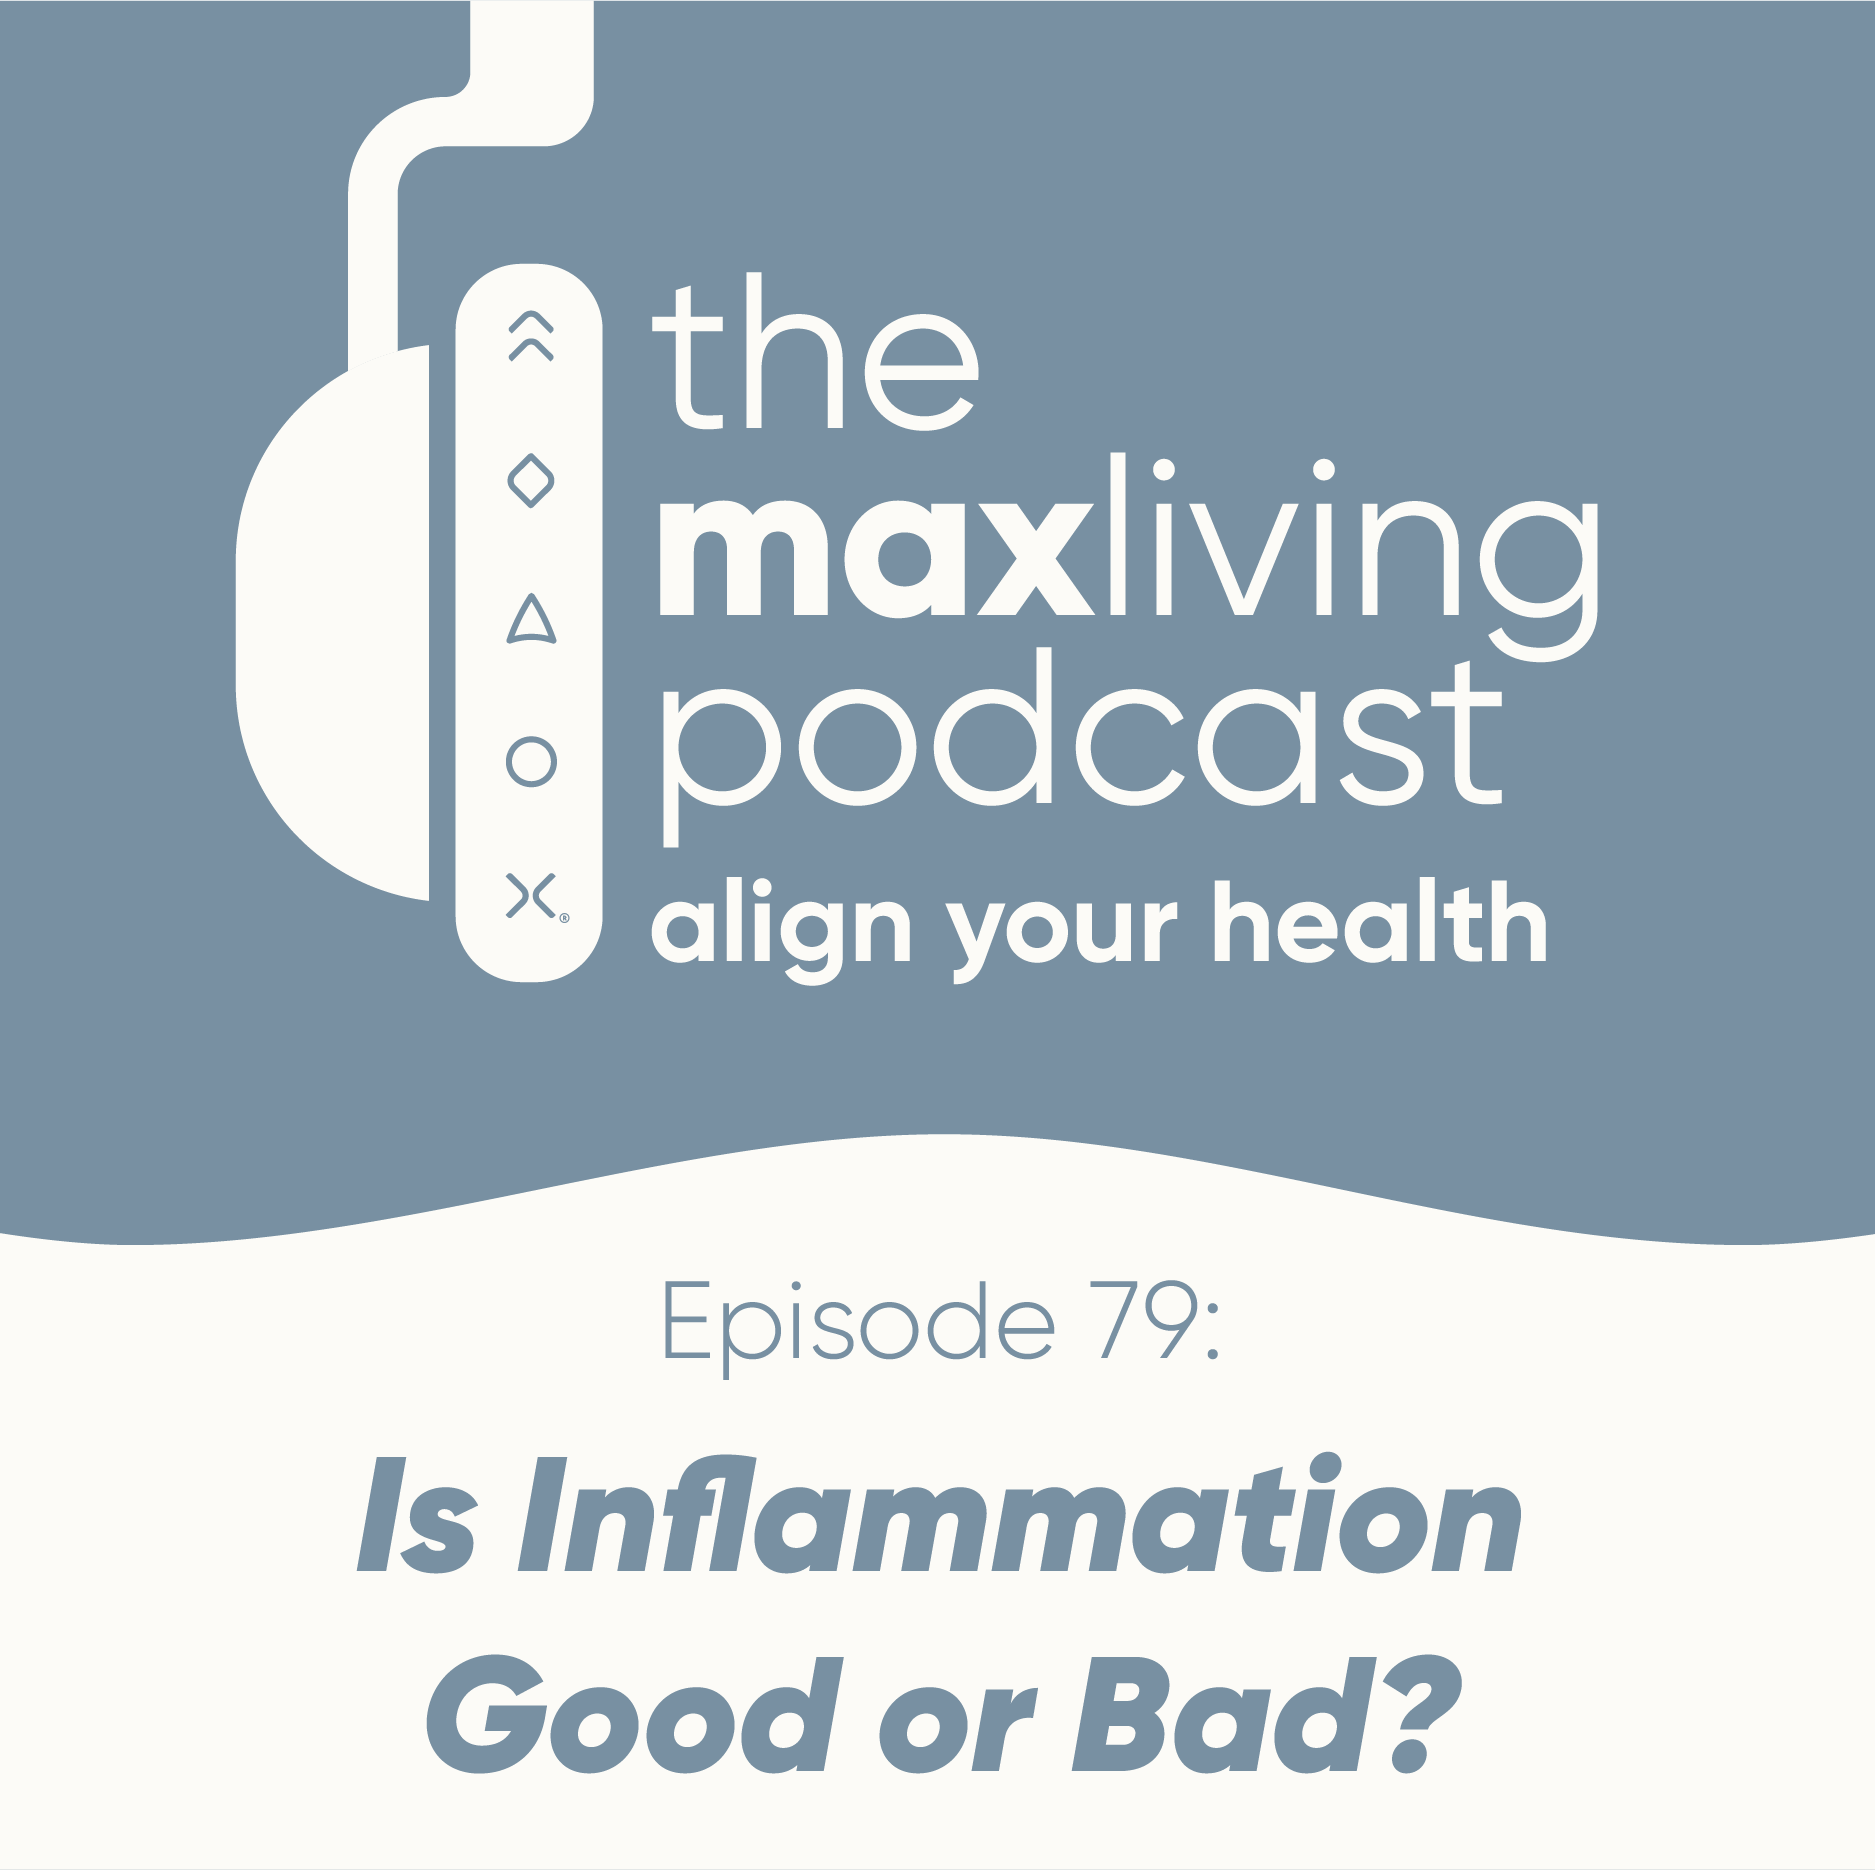 Is Inflammation Good or Bad?